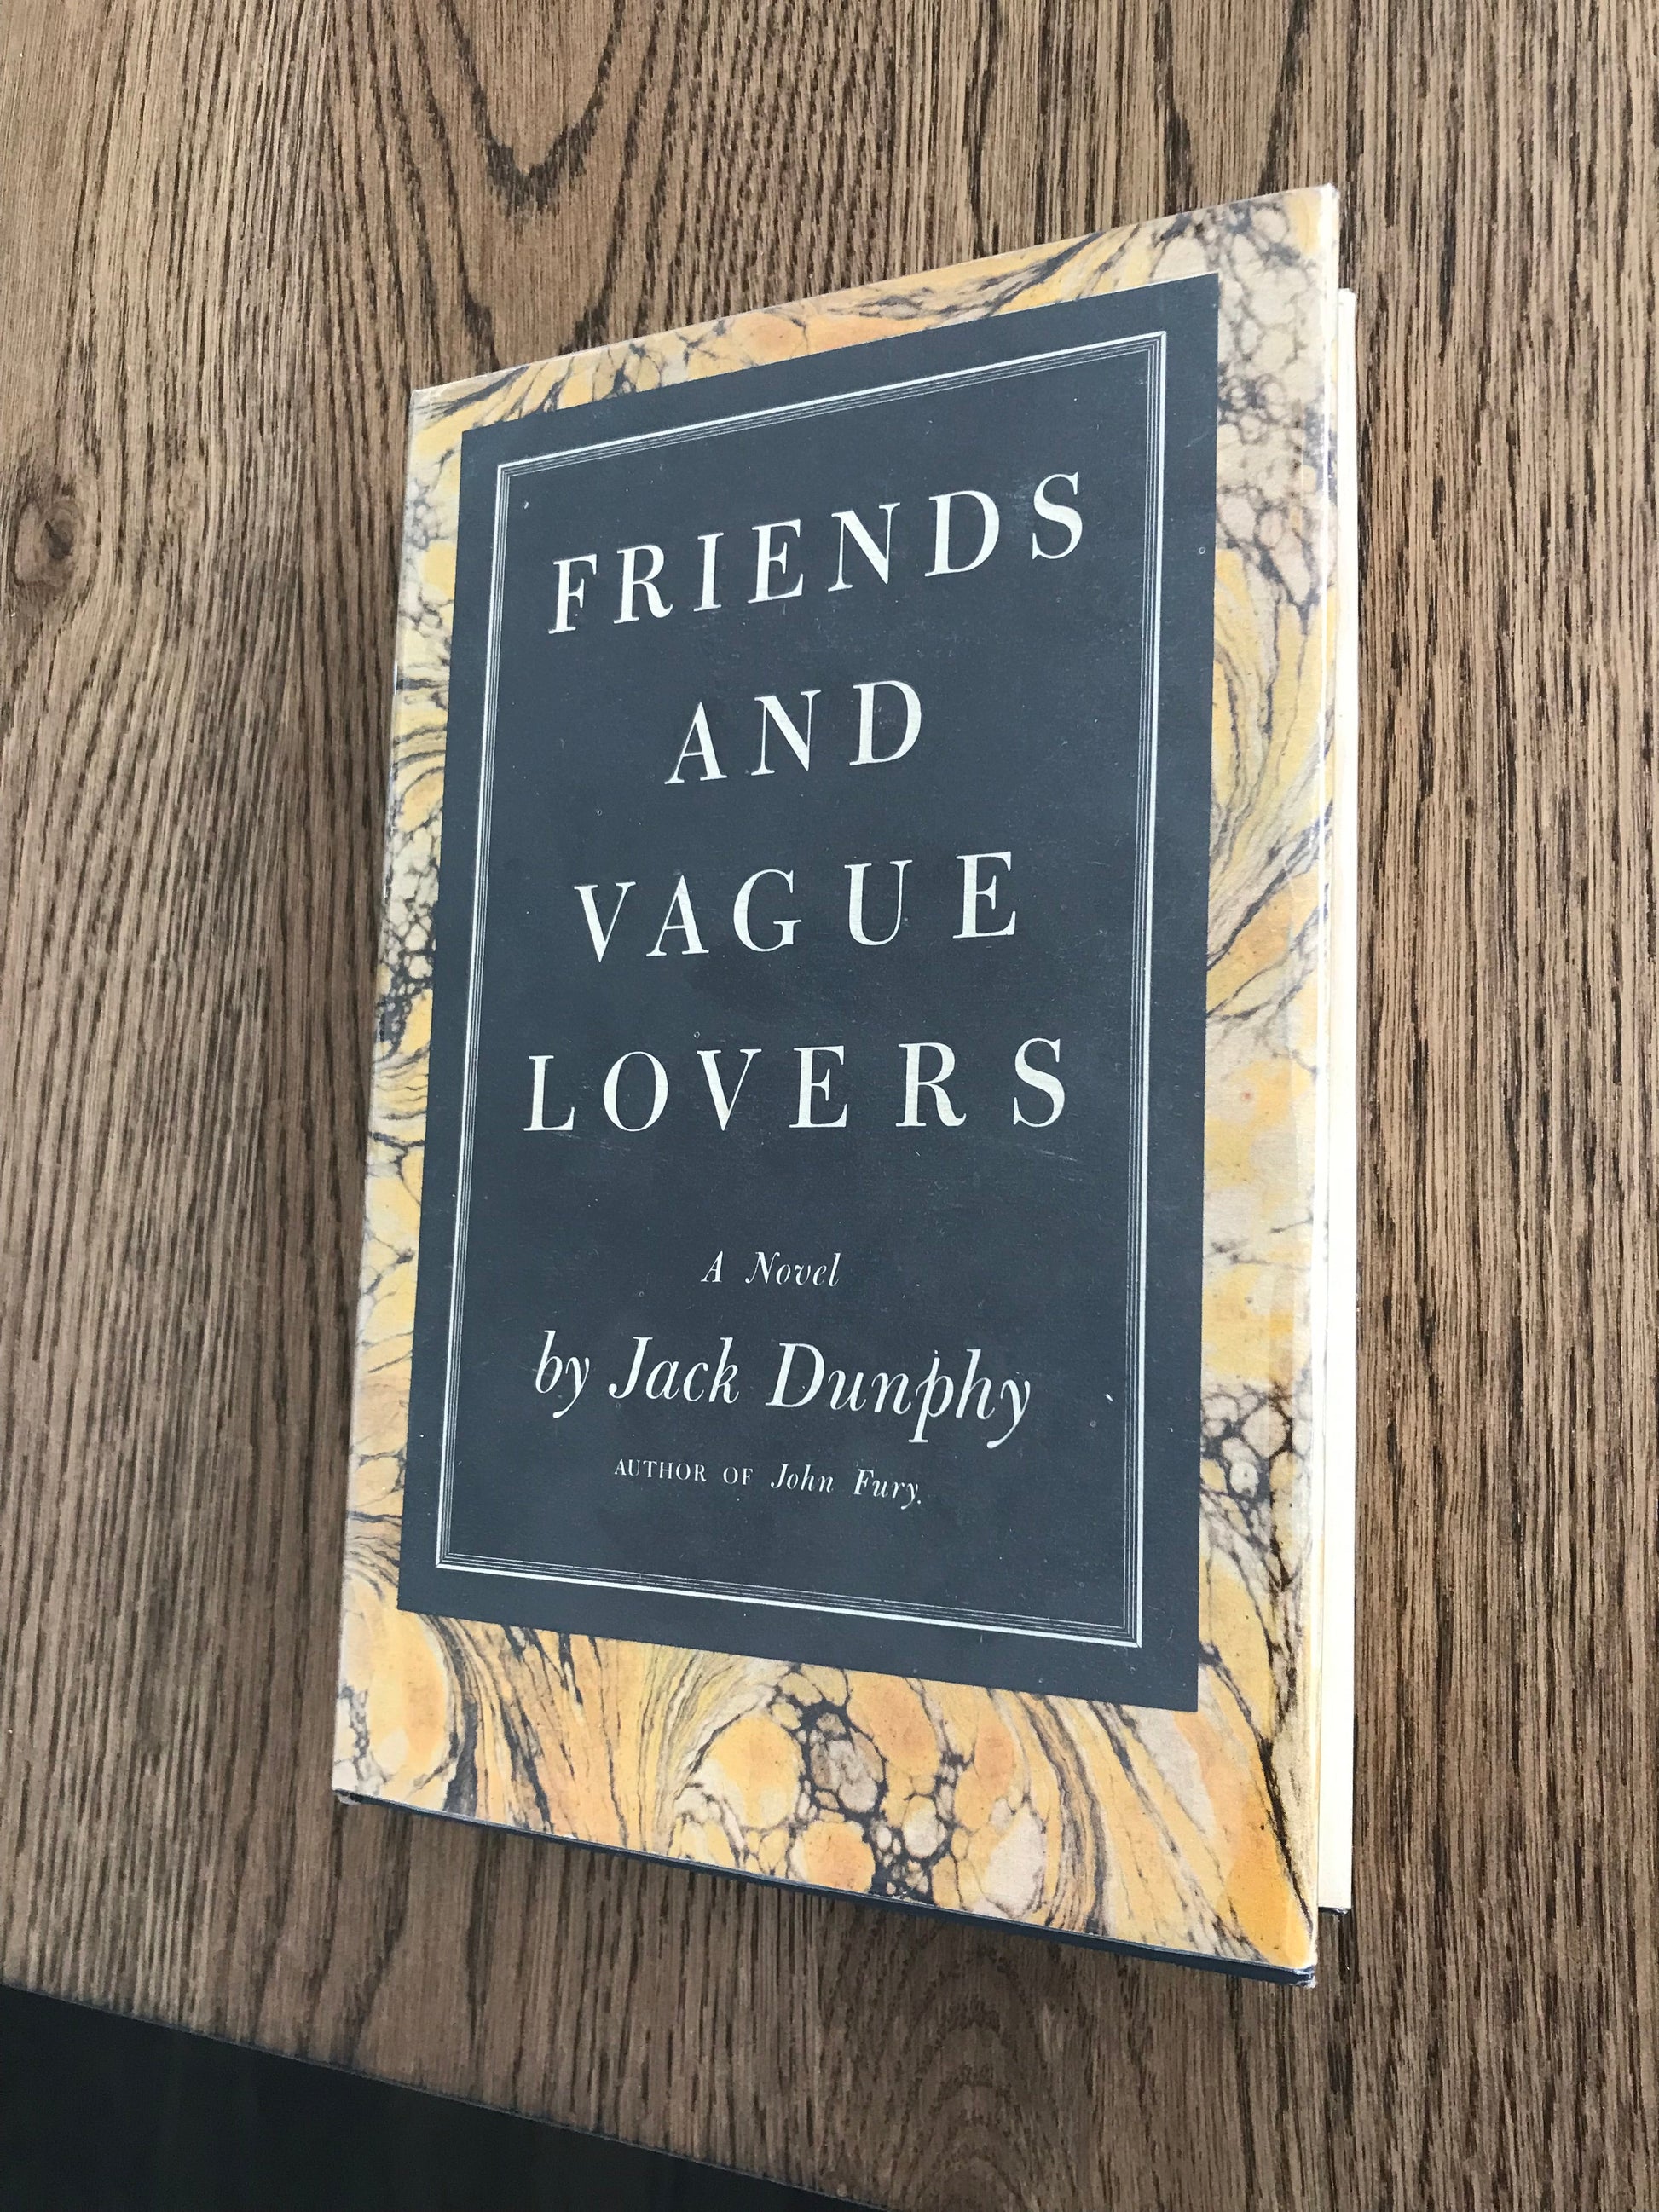 FRIENDS AND VAGUE LOVERS - BY JACK DUNPHY BooksCardsNBikes